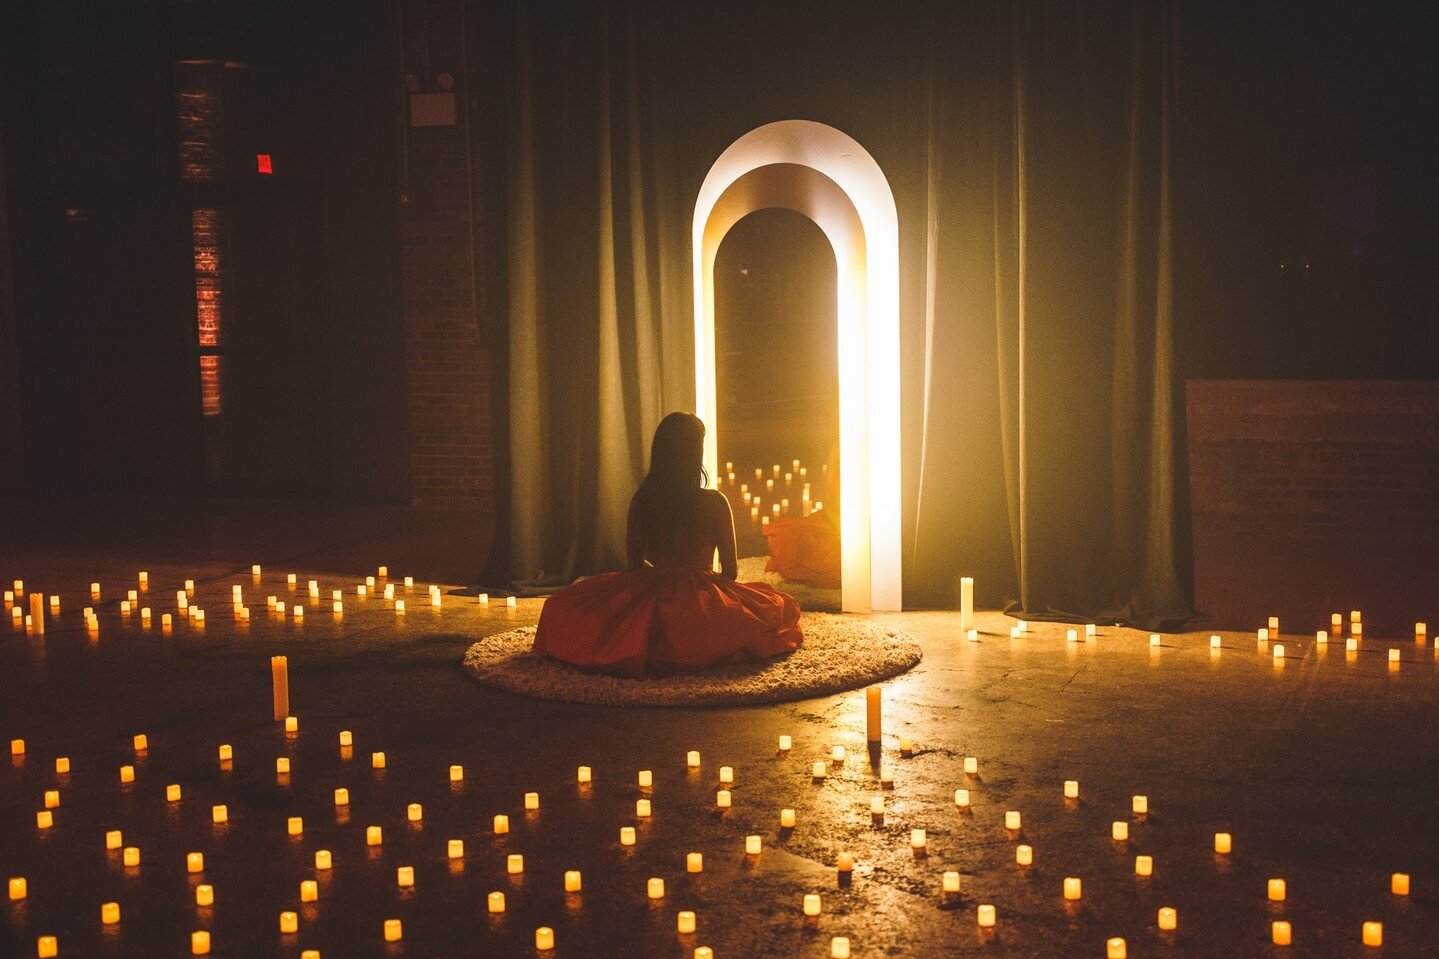 The MedGala, hosted at @knockdowncenter was not your typical alcohol-fueled event. The sober fund-raising celebration of wellness and meditation practices, benefiting the Three Jewels organization, brought together souls on the path to enlightenment.